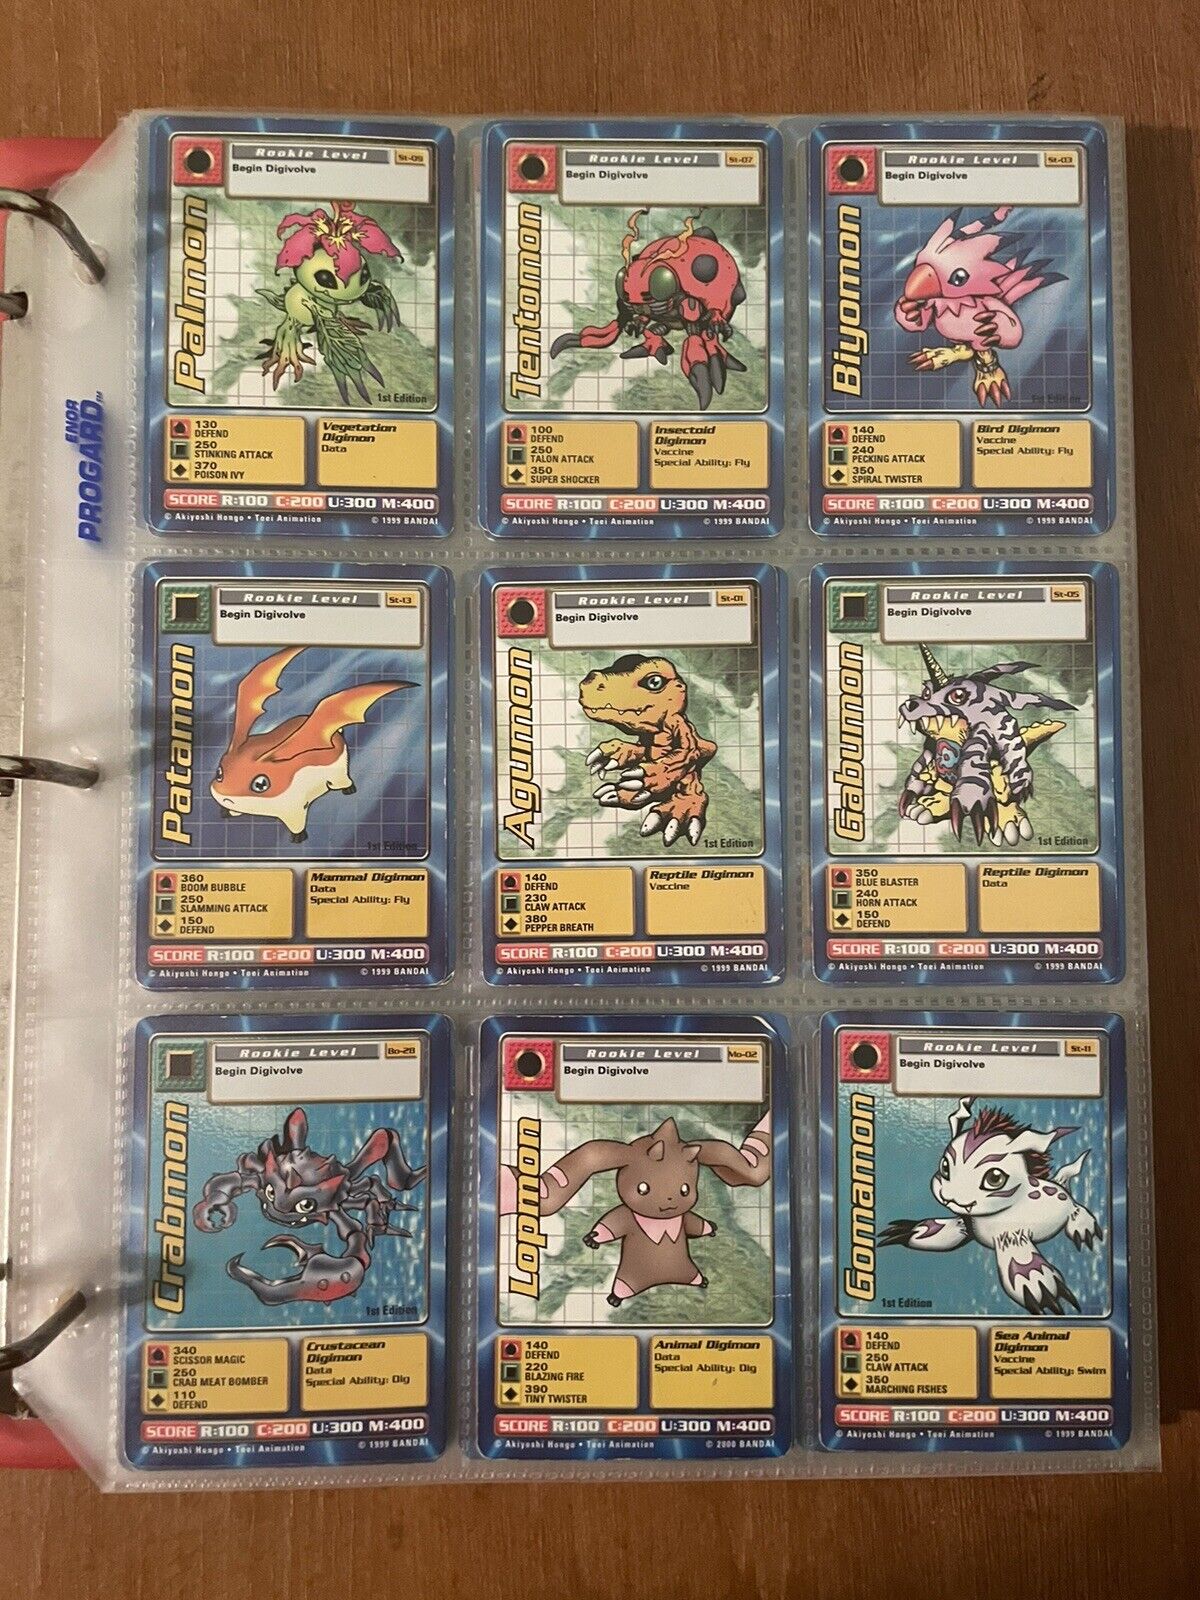 Digimon Card Lot / Collection (212 Cards) From 1999-2000 (Series 1, 2 & Movie)